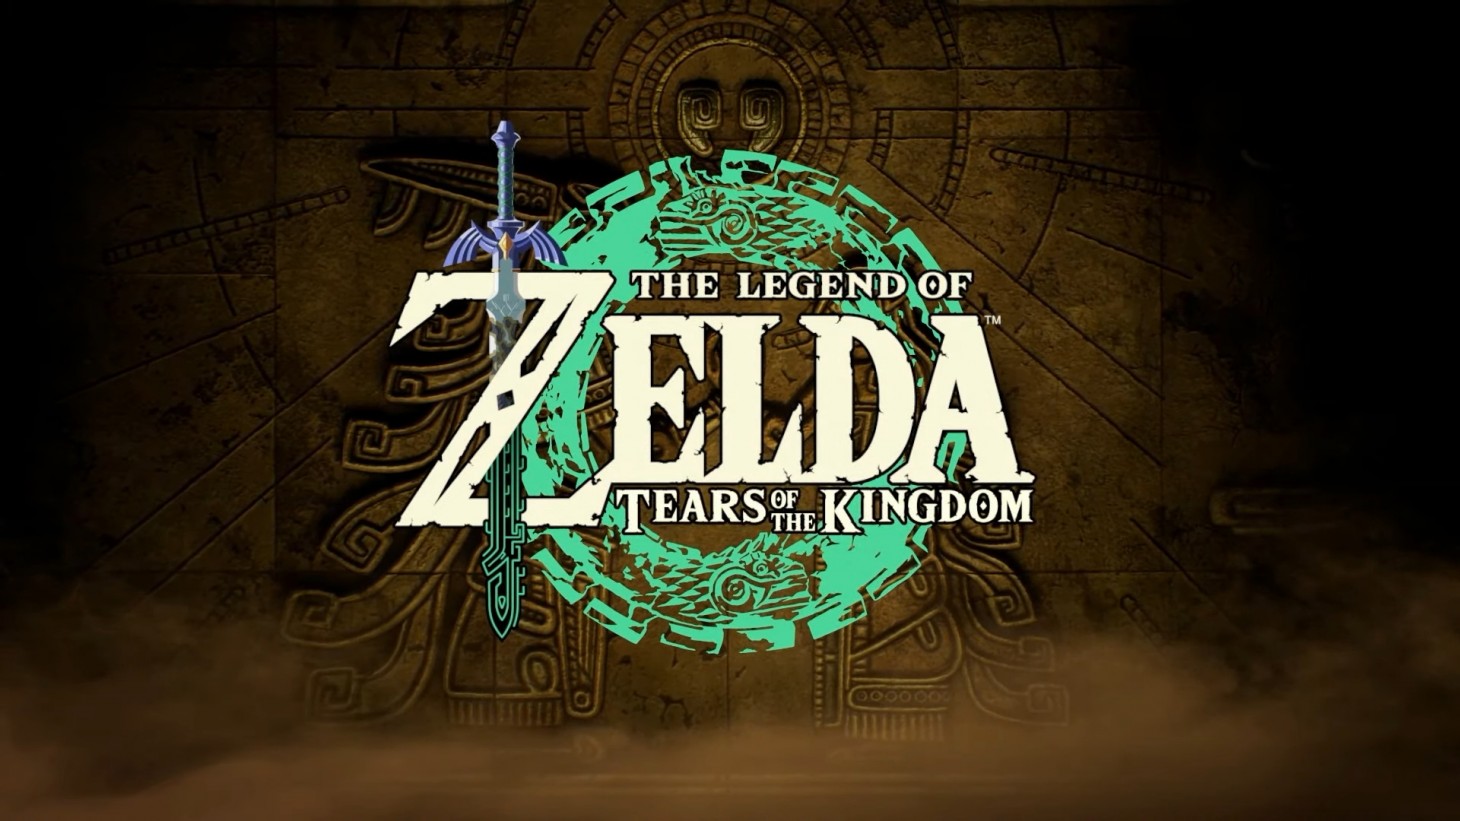 What We Know About The Legend of Zelda: Tears of the Kingdom